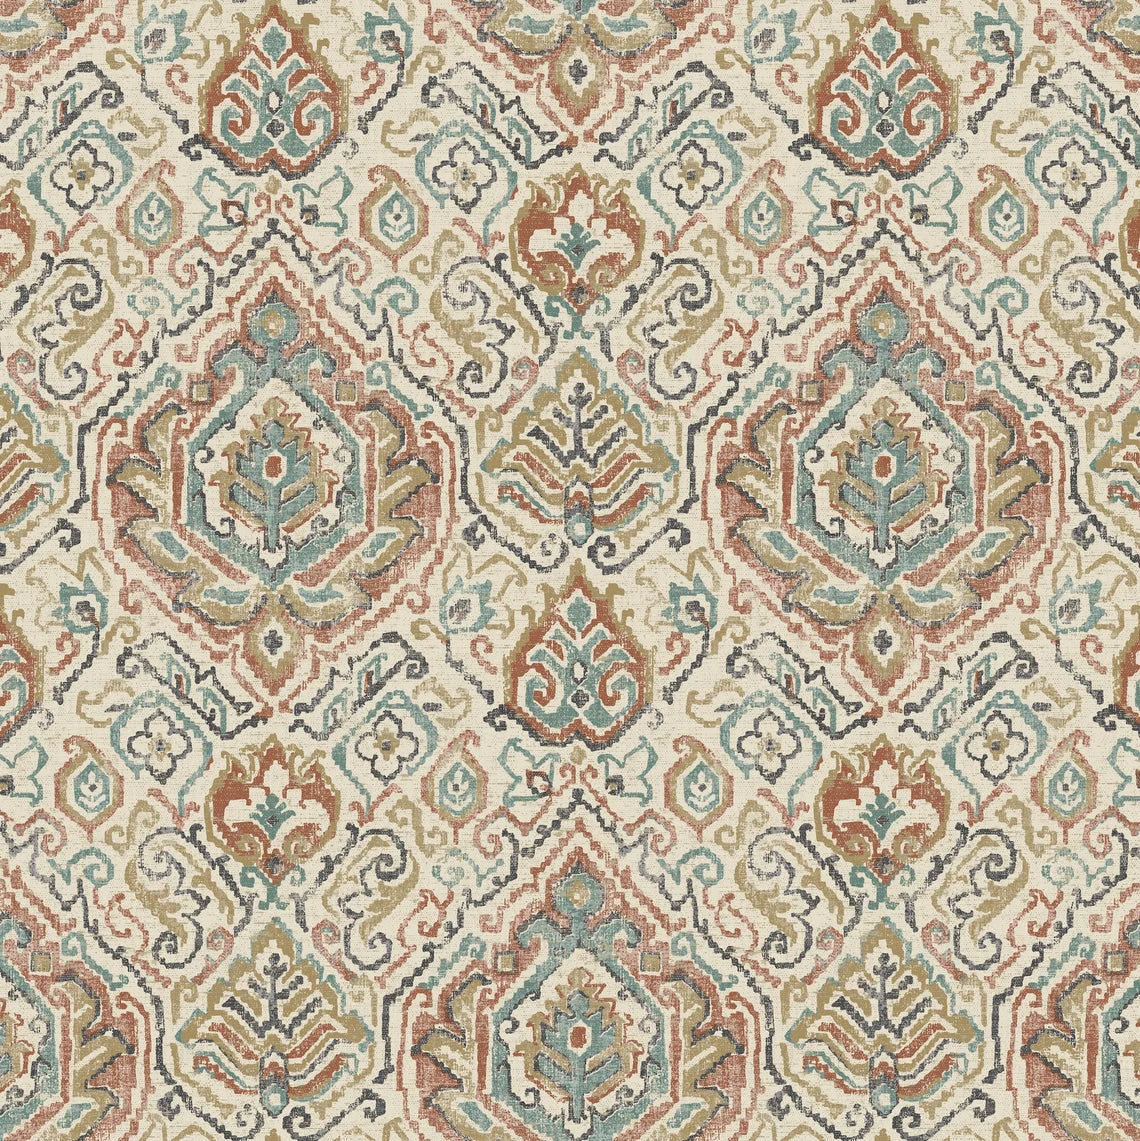 Tailored Bedskirt in Cathell Clay Medallion Weathered Persian Rug Design- Large Scale